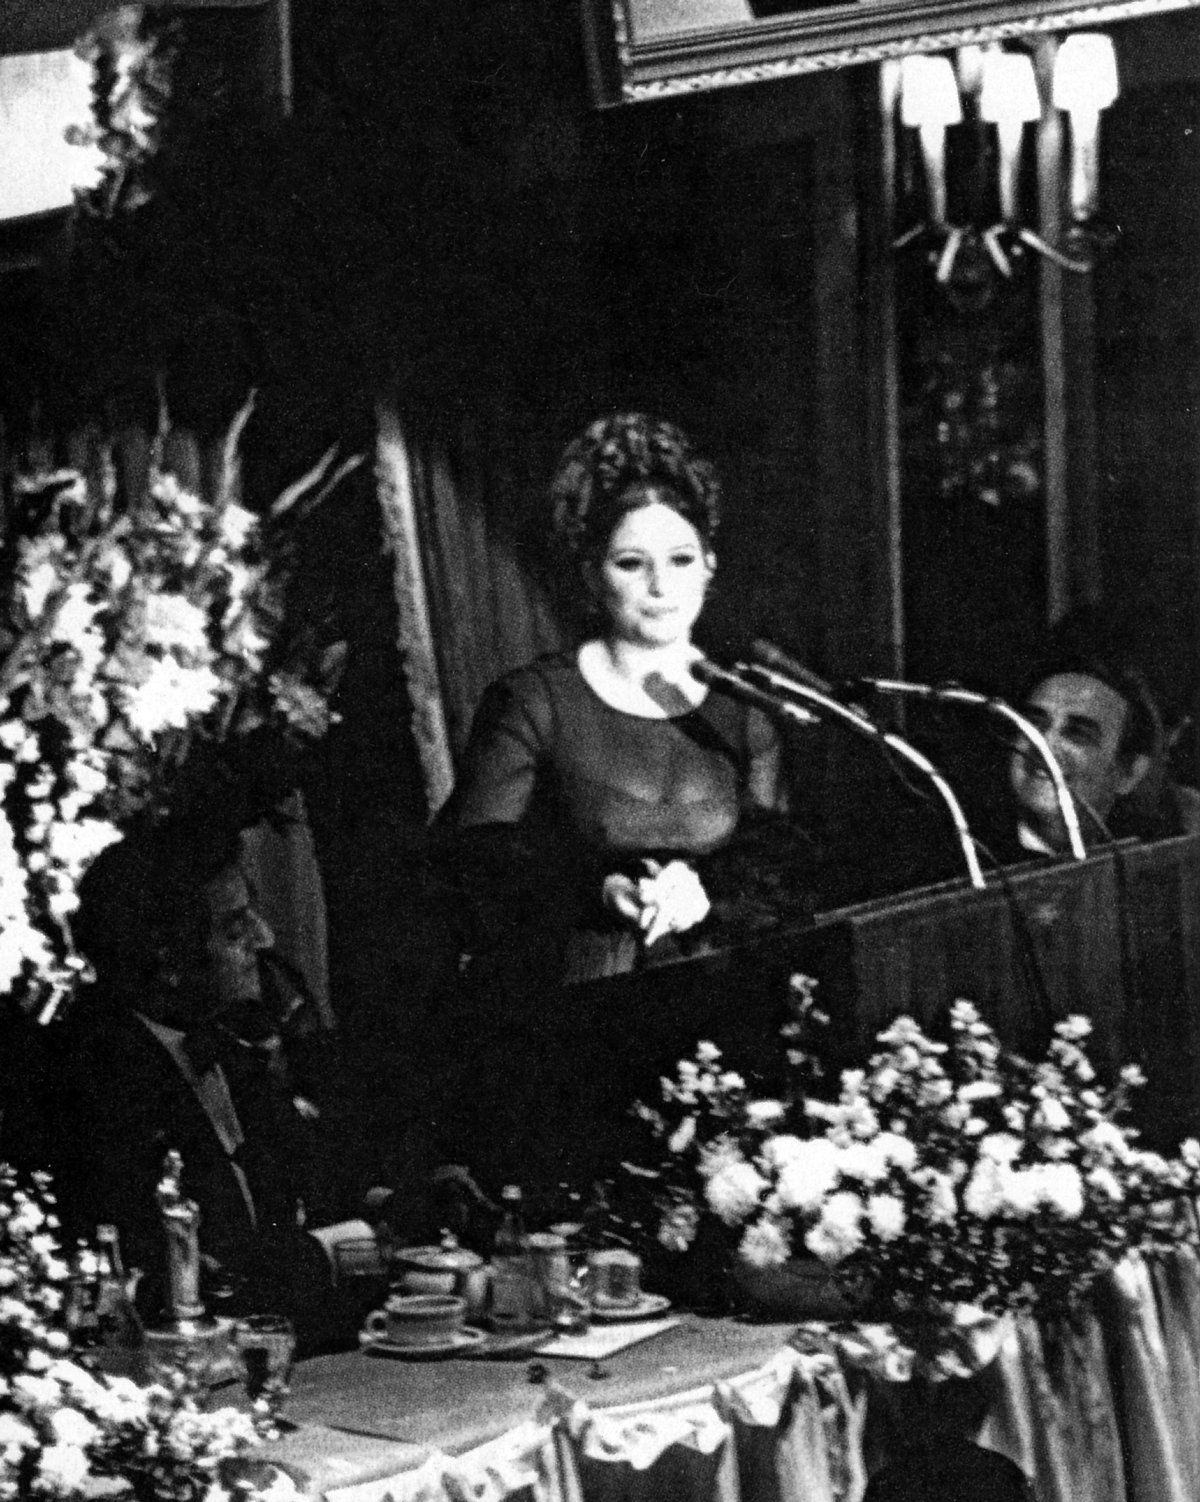 Barbra Streisand at the dais accepting her award